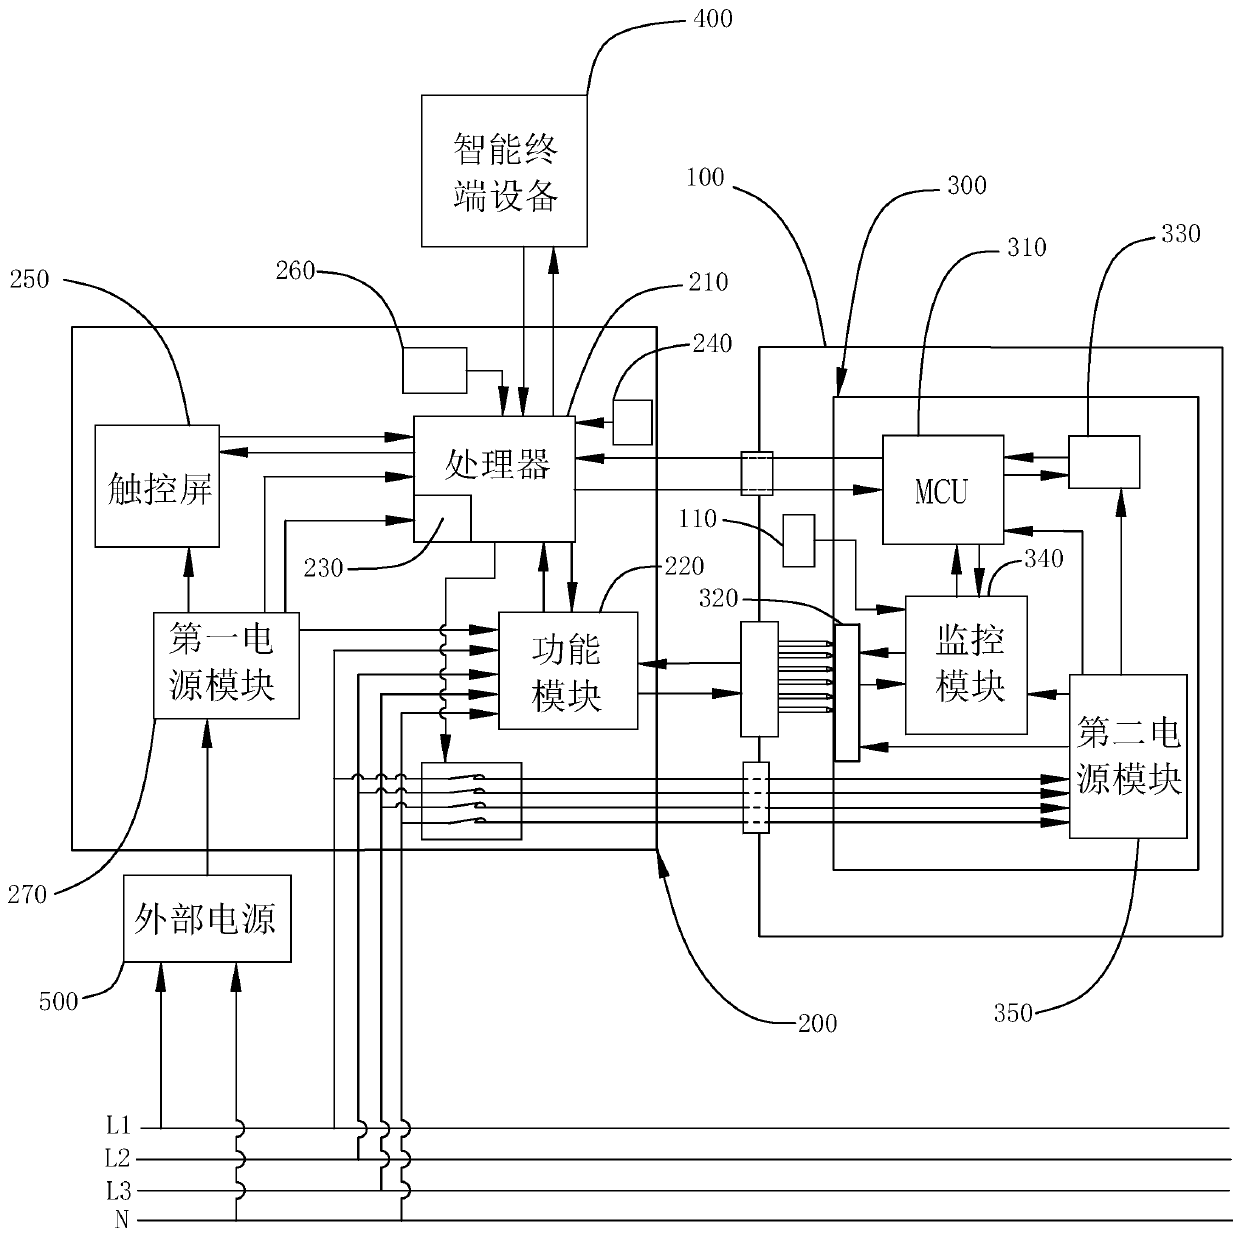 Electric control board test method and test system